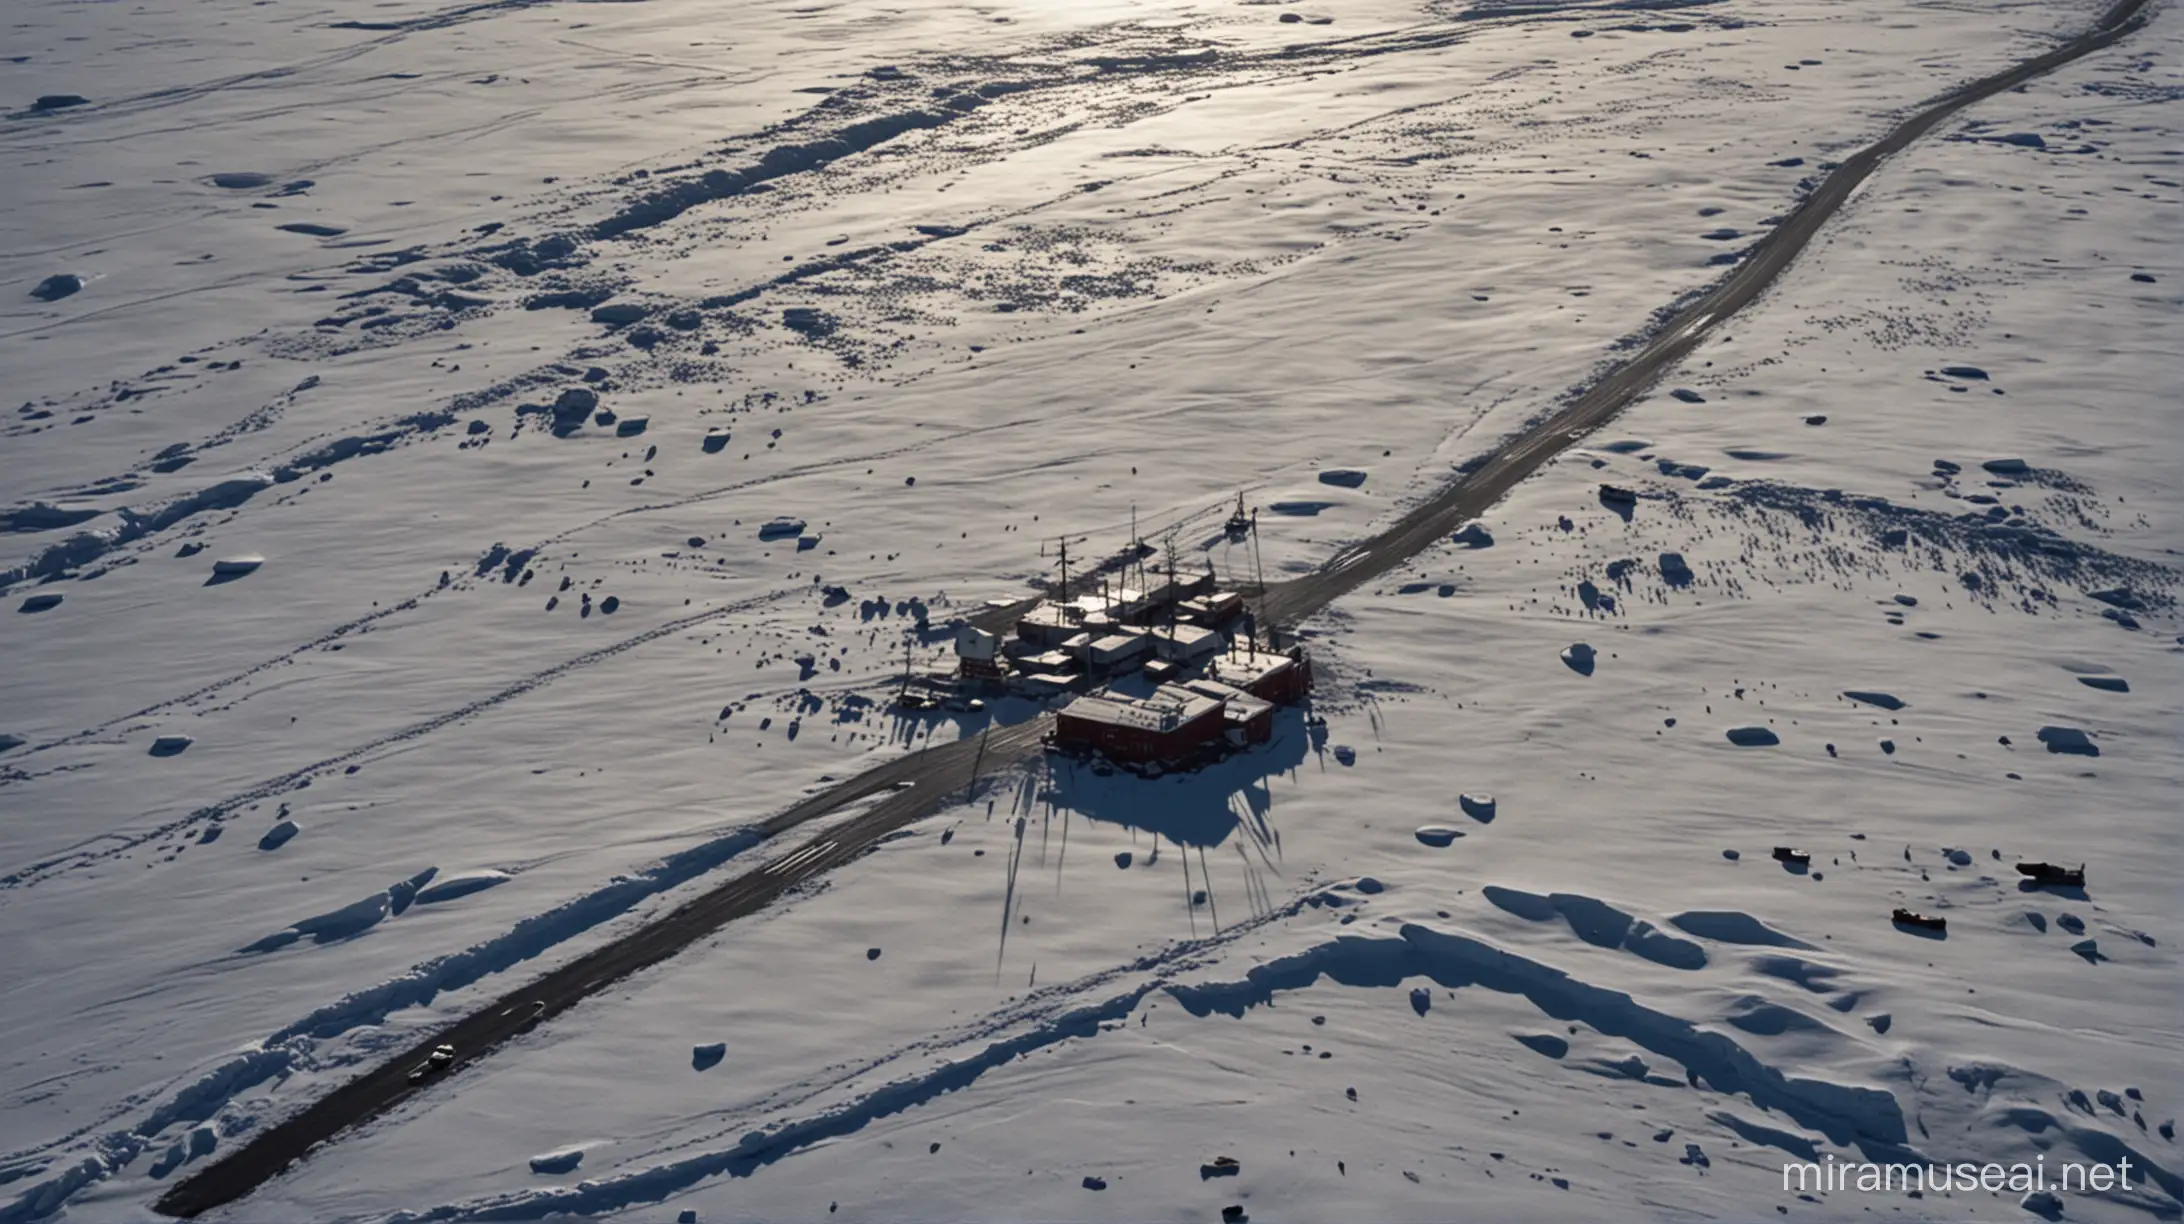 cinematic still, film by john carpenter, the thing, antarctica, mcmurdo station, aerial view